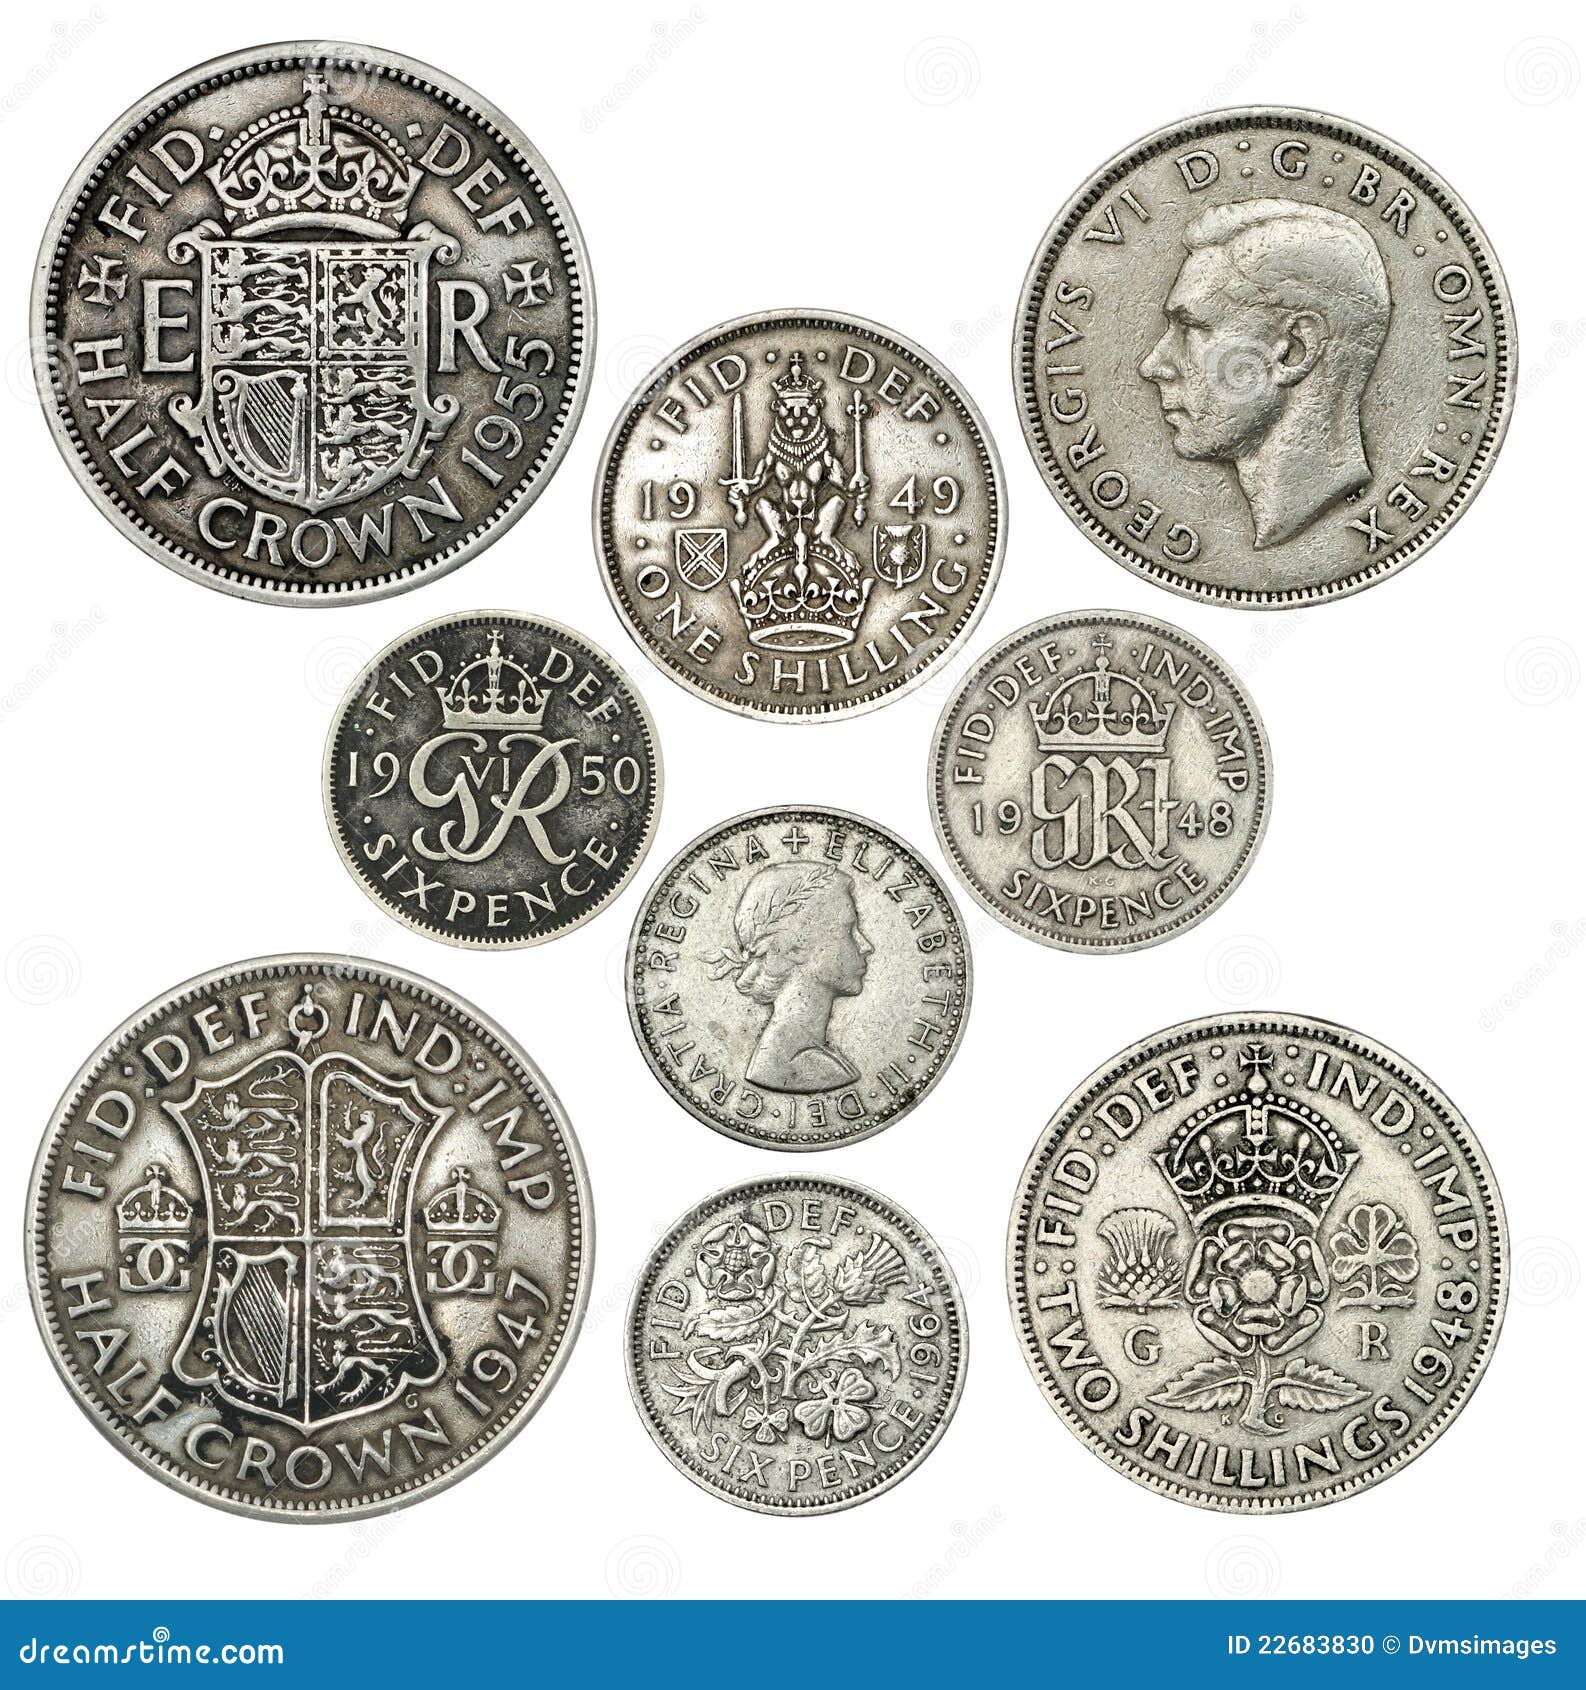 Old British Coins Stock Photo - Image: 22683830